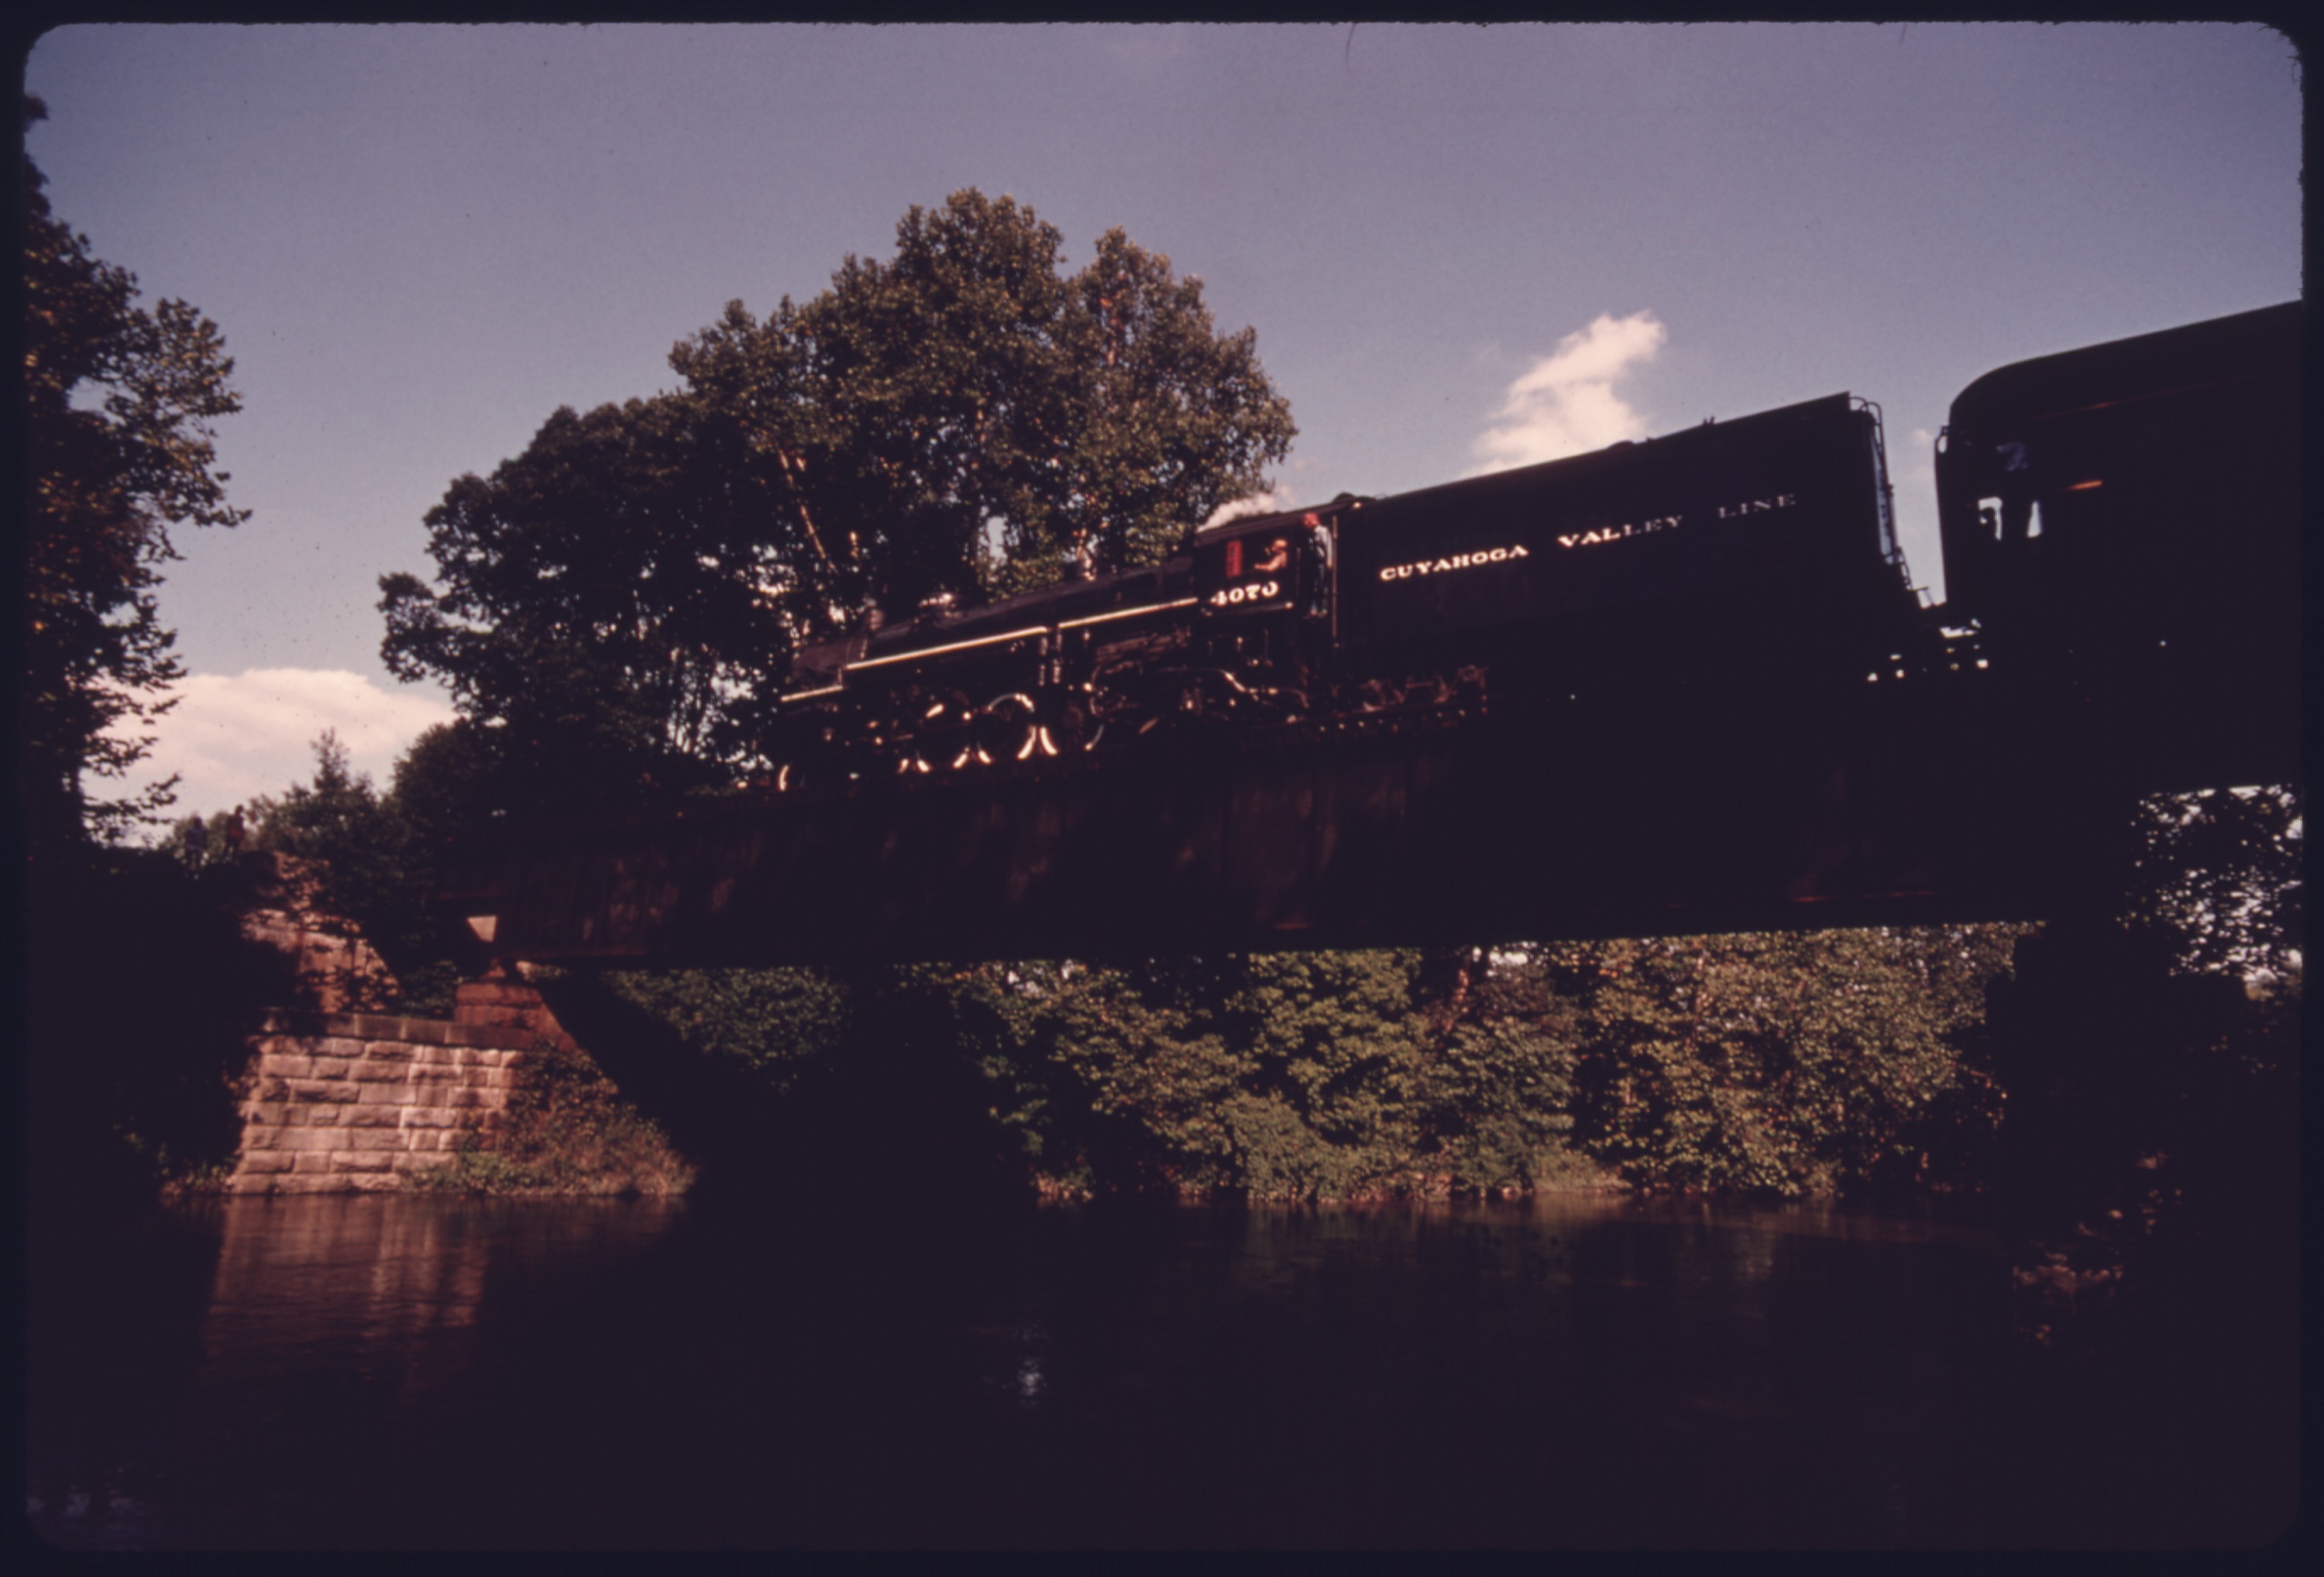 CUYAHOGA_VALLEY_LINE_STEAM_POWERED_WEEKEND_PASSENGER_TRAIN_CROSSES_THE_CUYAHOGA_RIVER_AT_THE_DEEP_LOCK_QUARRY,_A_PARK..._-_NARA_-_557960